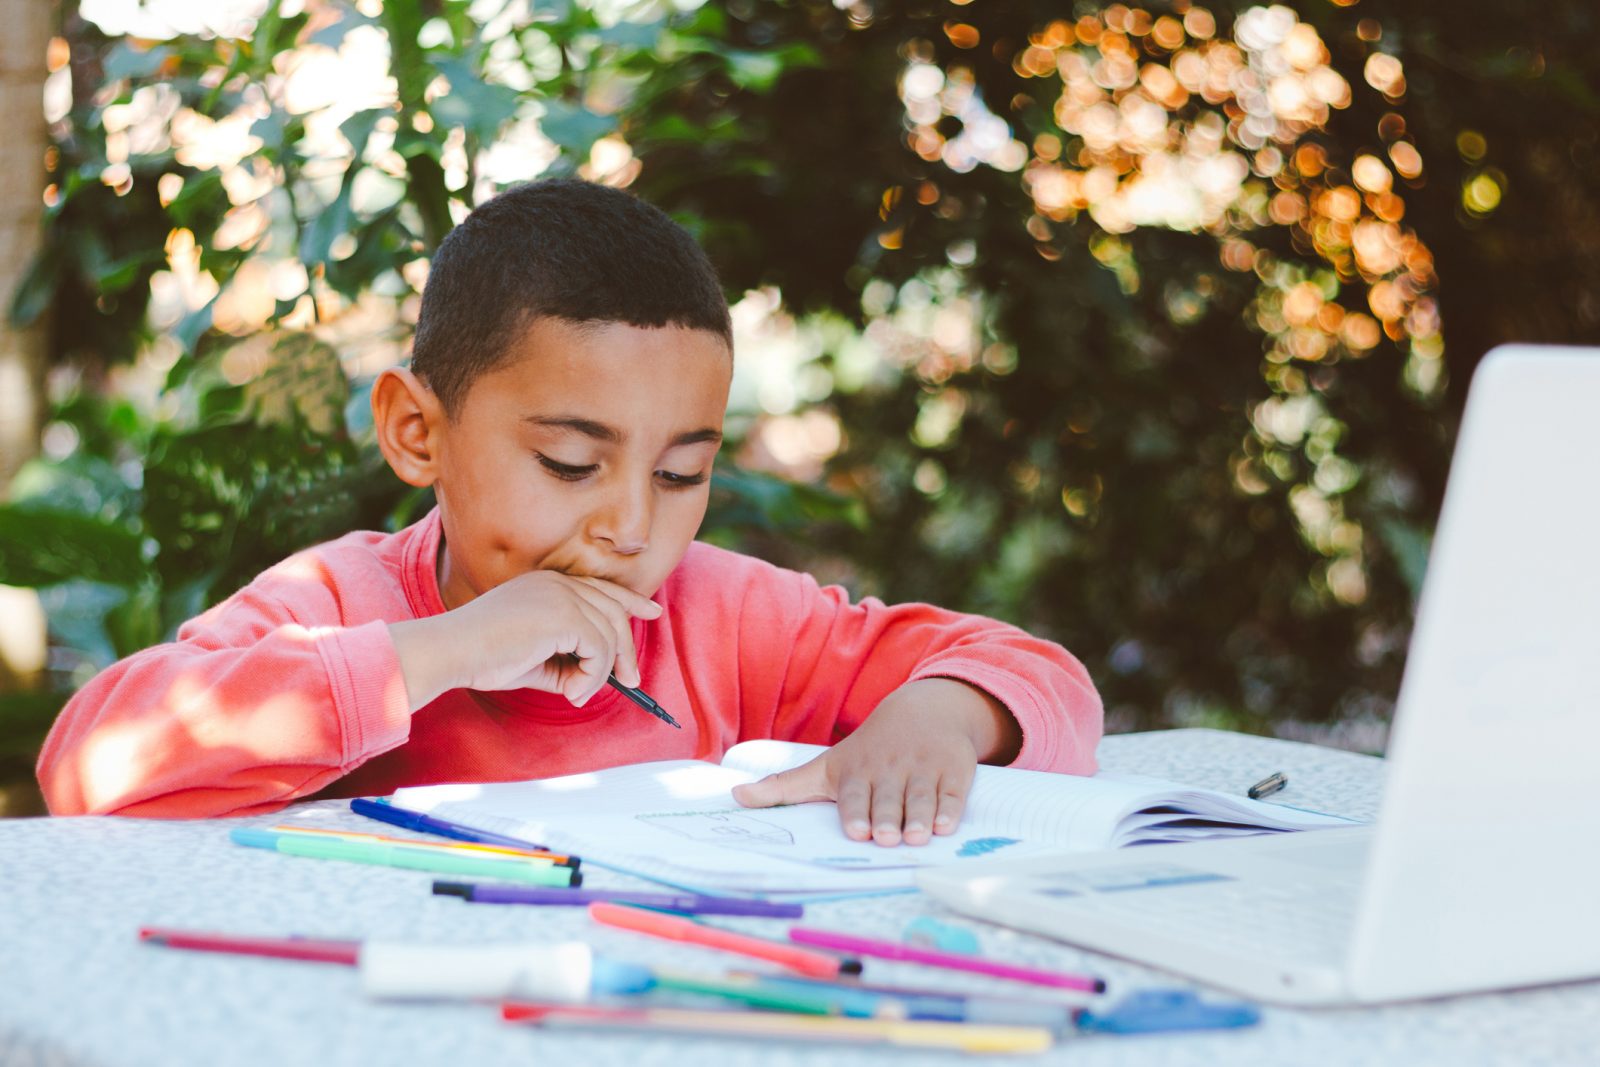 A boy sits at a table outdoors writing and drawing in a notebook with colourful markers.